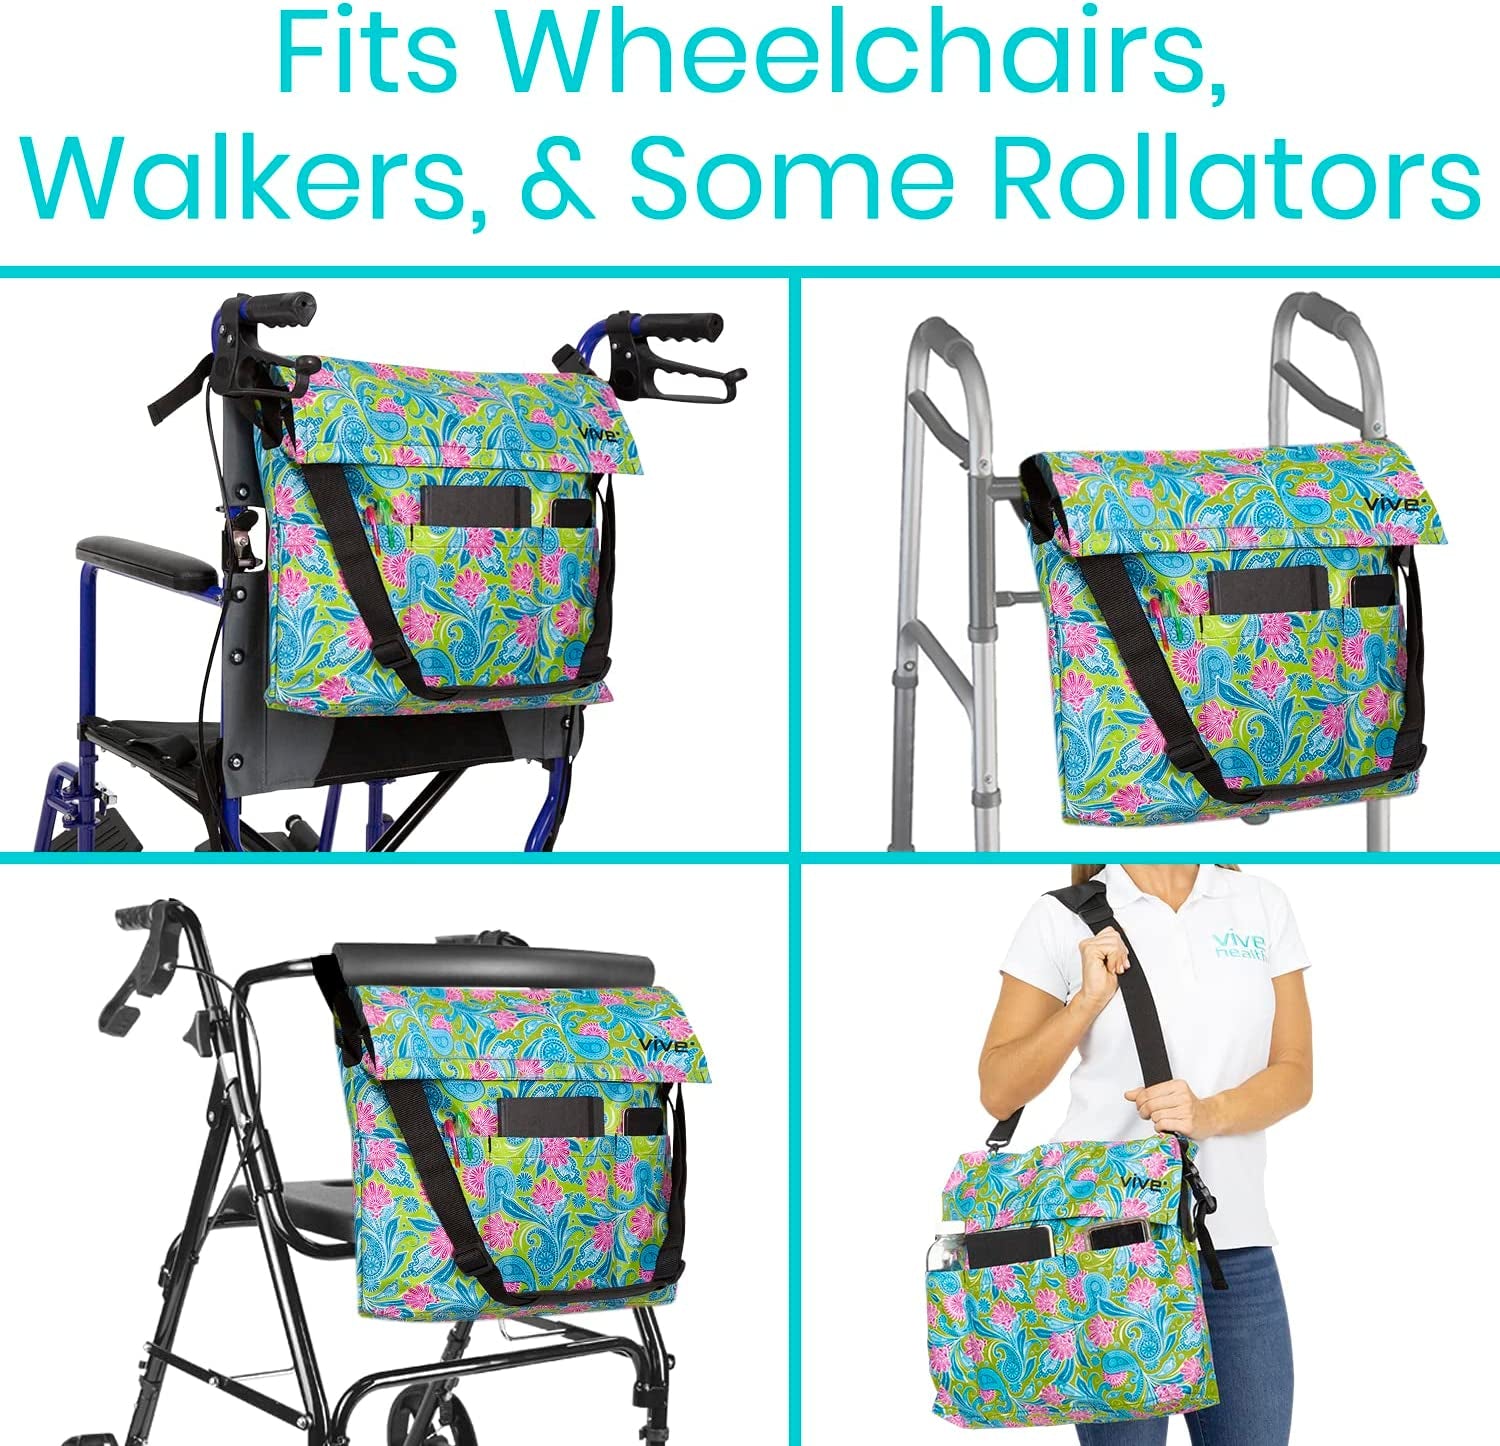 XL Wheelchair Bag - Waterproof, Scratch-Resistant, Double-Stitched, Machine Washable Accessory for Adults, Seniors, 15 Colors - Storage Walker Backpack to Hang on Back of Wheel Chair